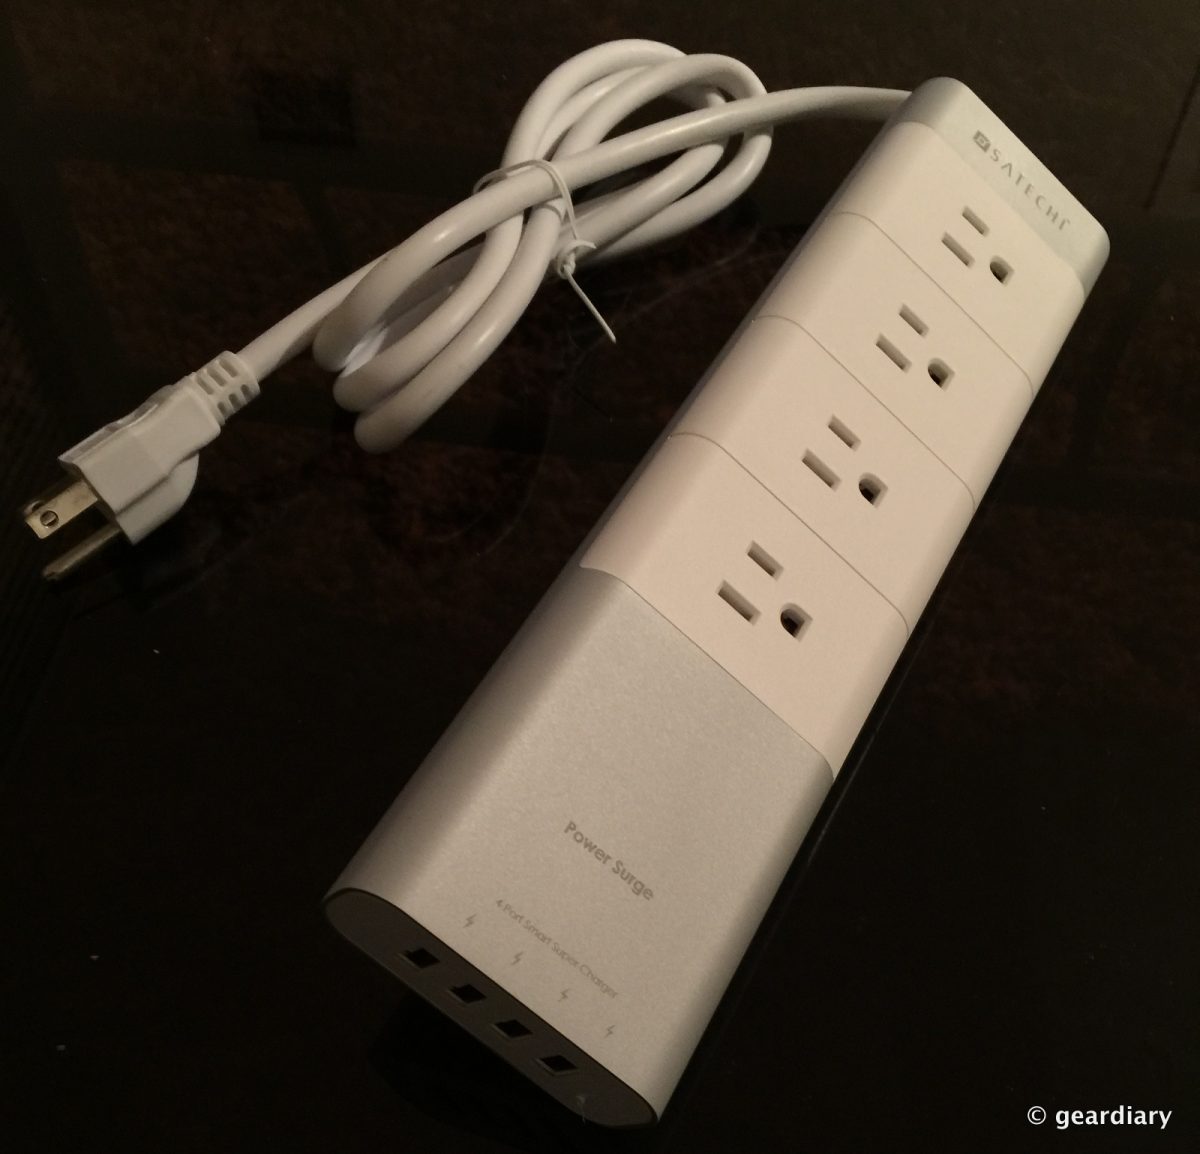 Never Run Out Of Outlets with Satechi's Aluminum Power Strip